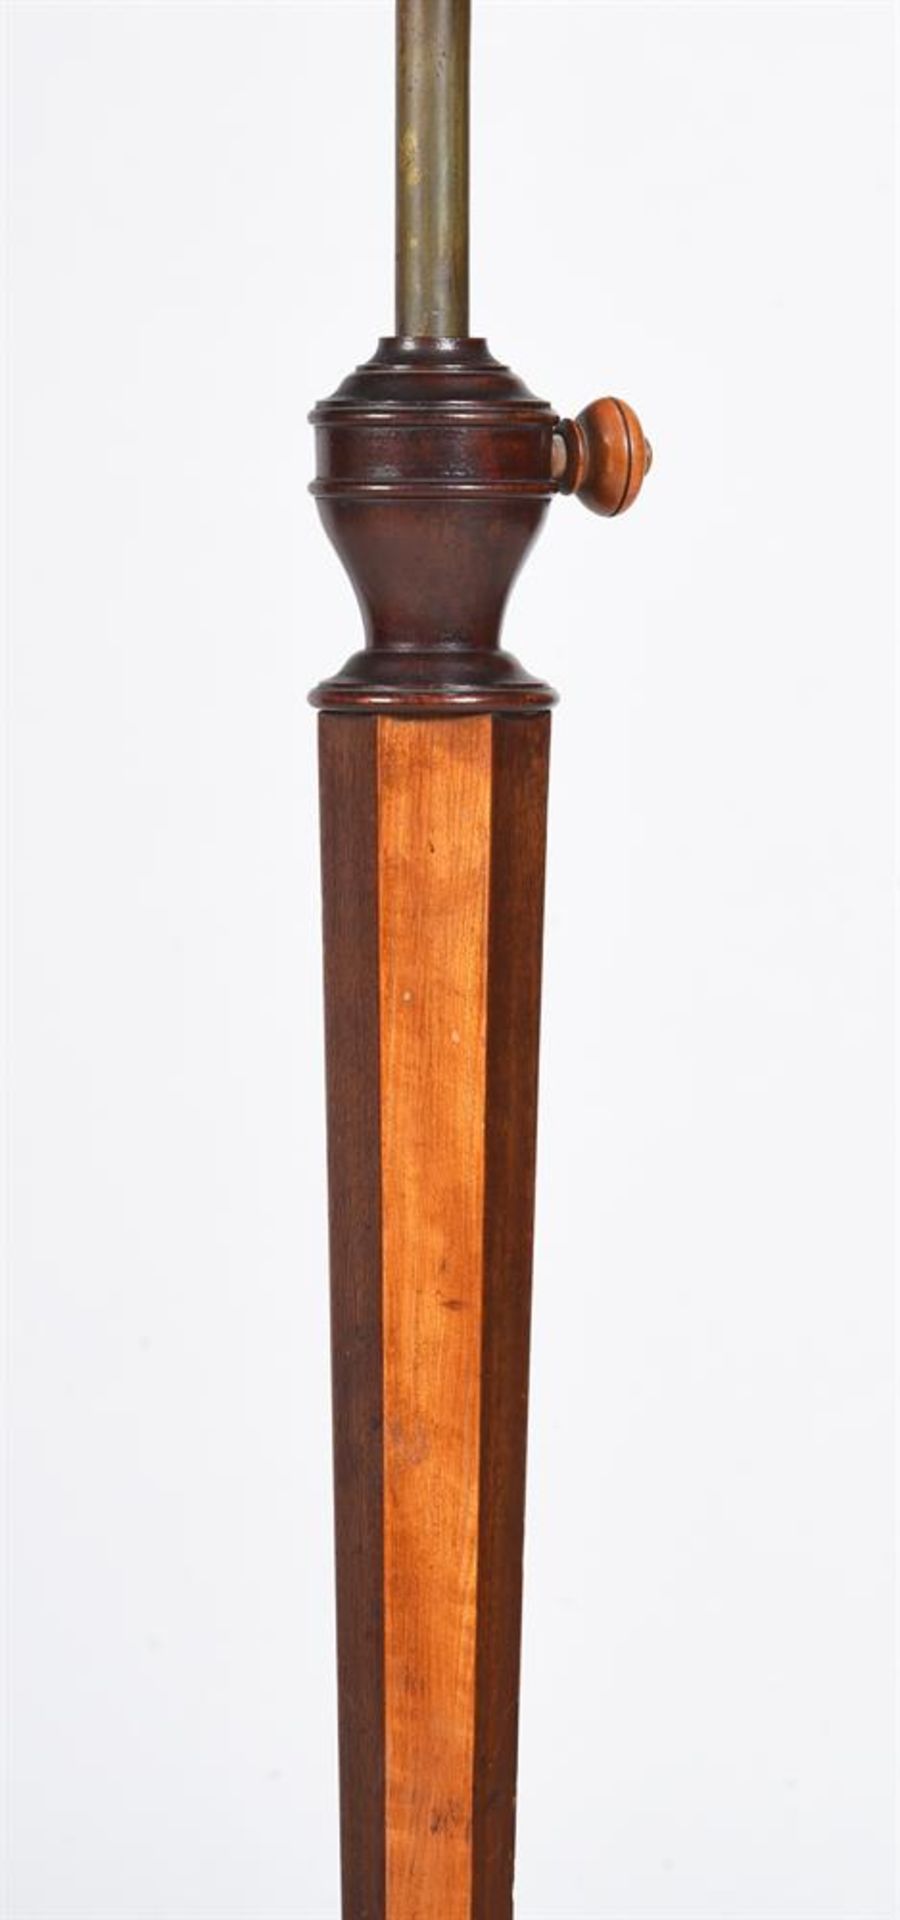 A LATE VICTORIAN SATINWOOD LYRE MUSIC STAND, LATE 19TH CENTURY - Image 4 of 5